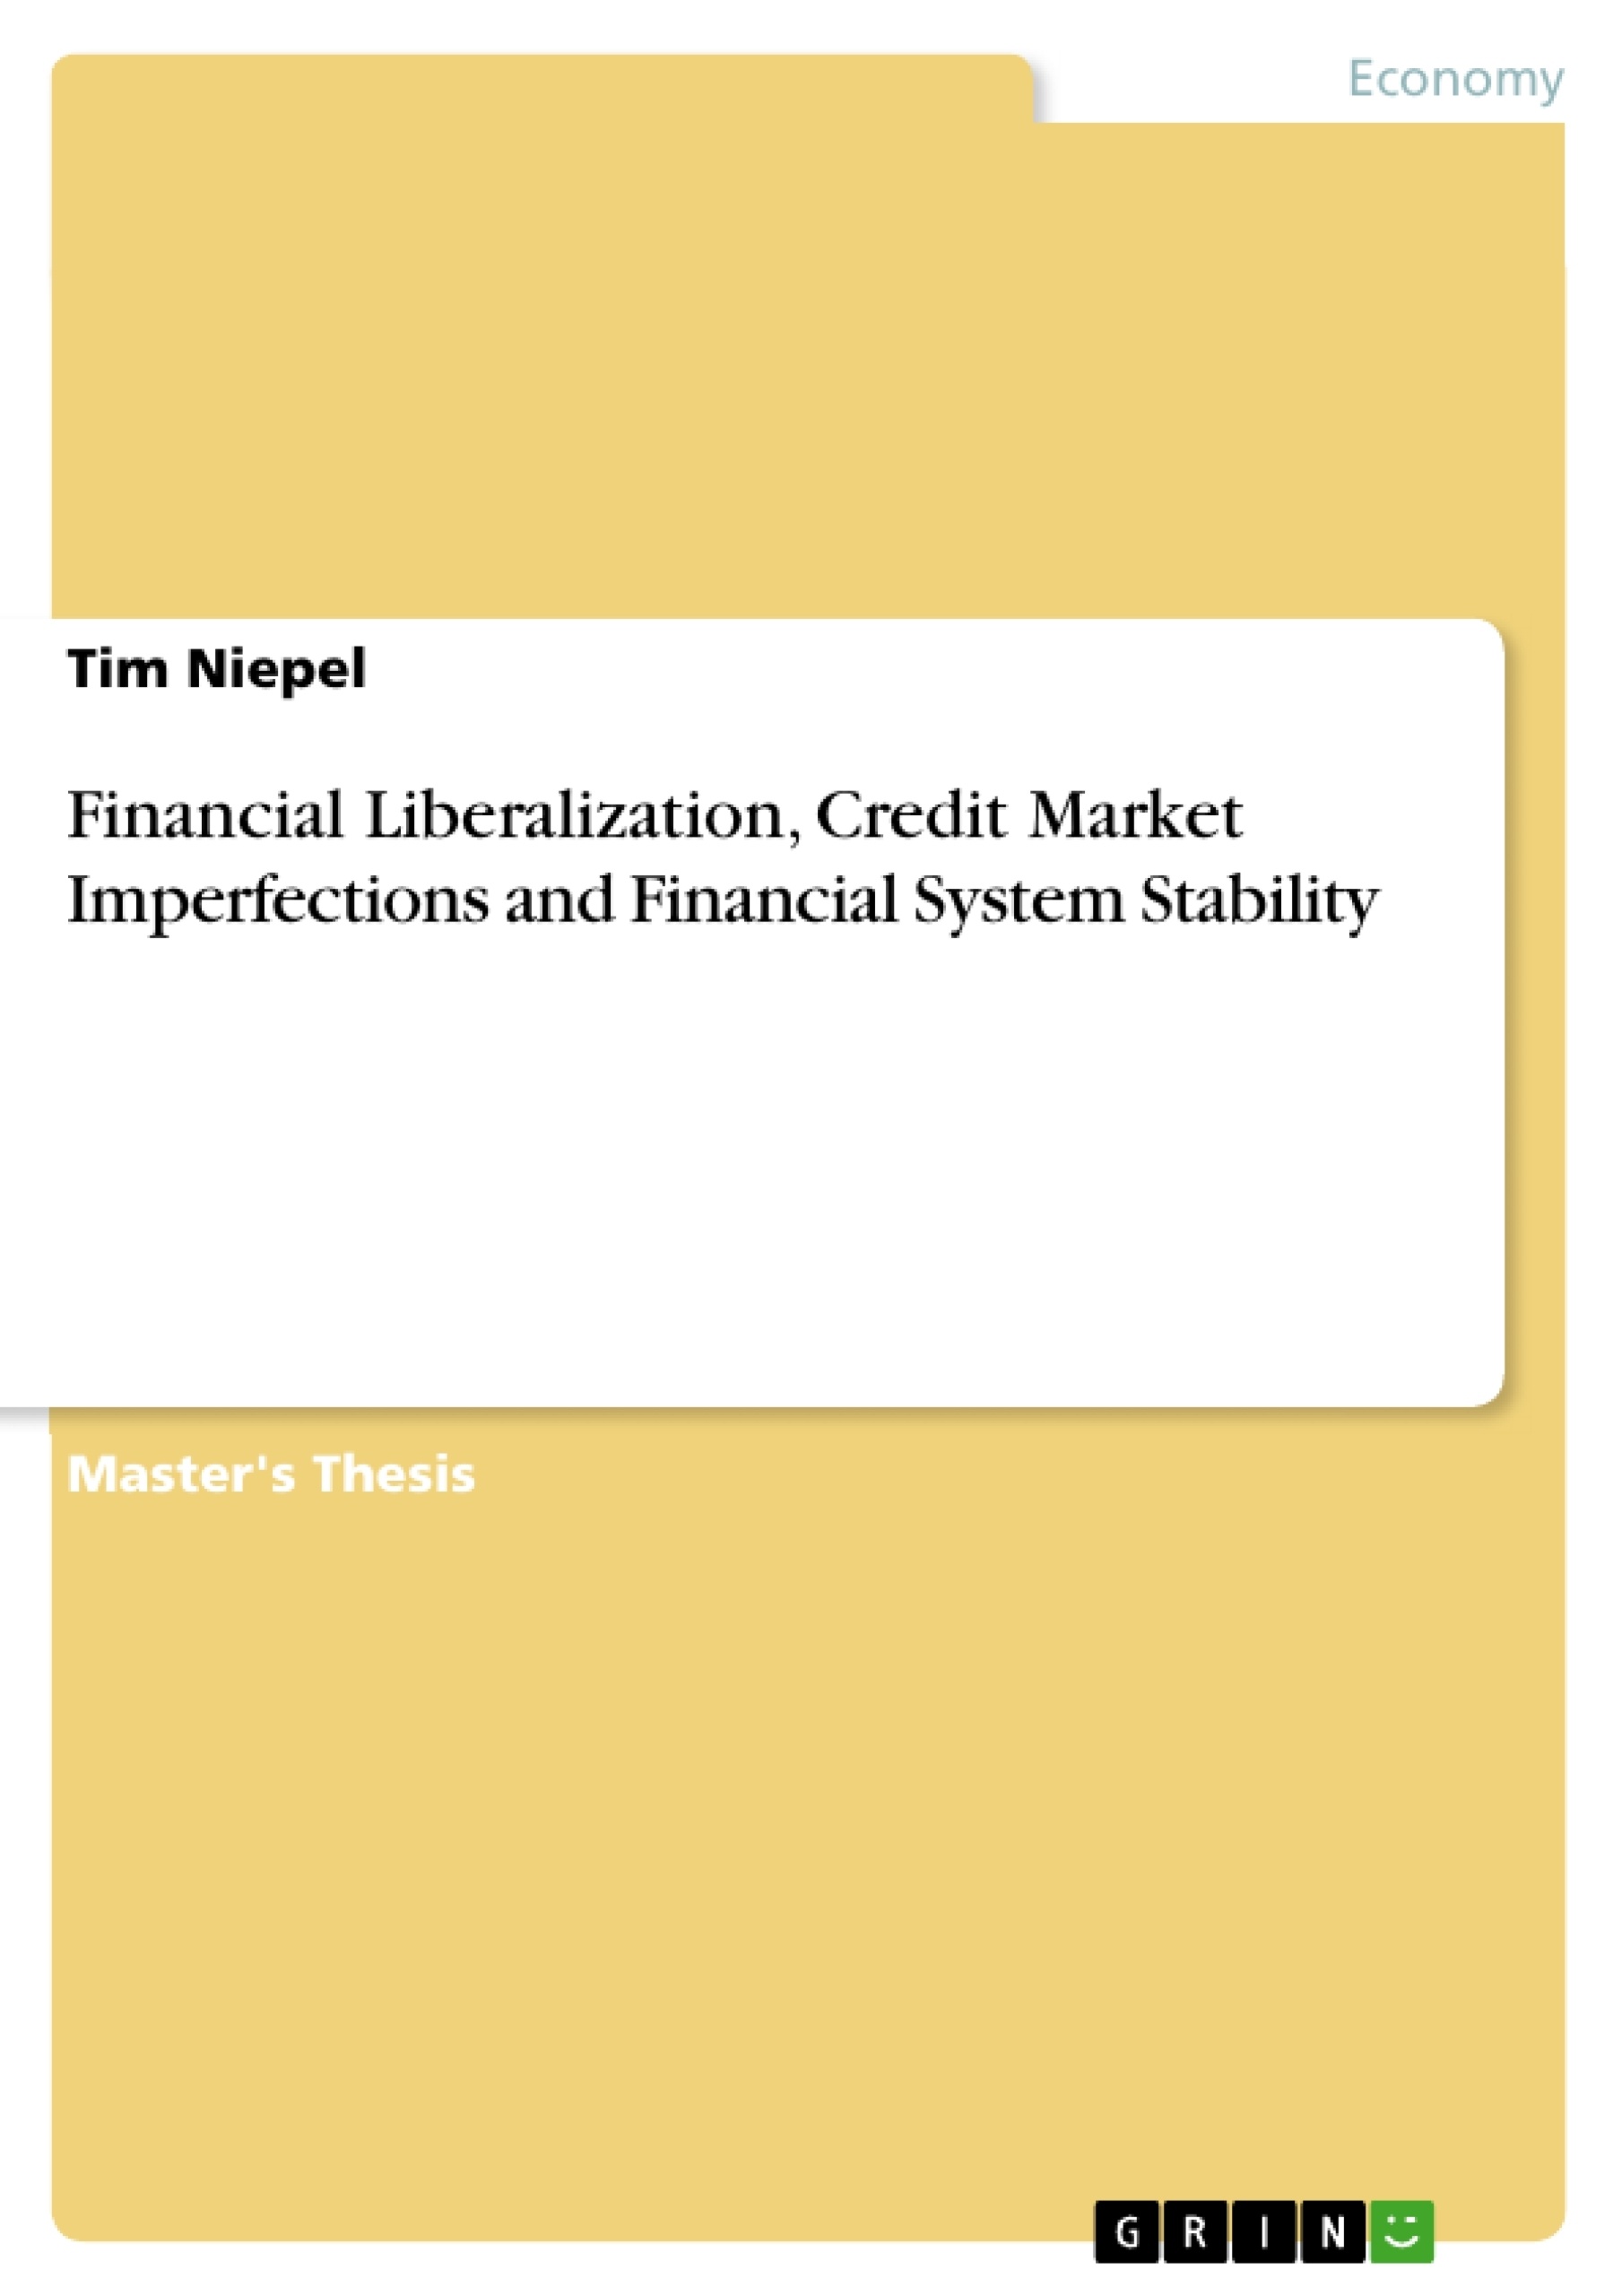 Título: Financial Liberalization, Credit Market Imperfections and Financial System Stability